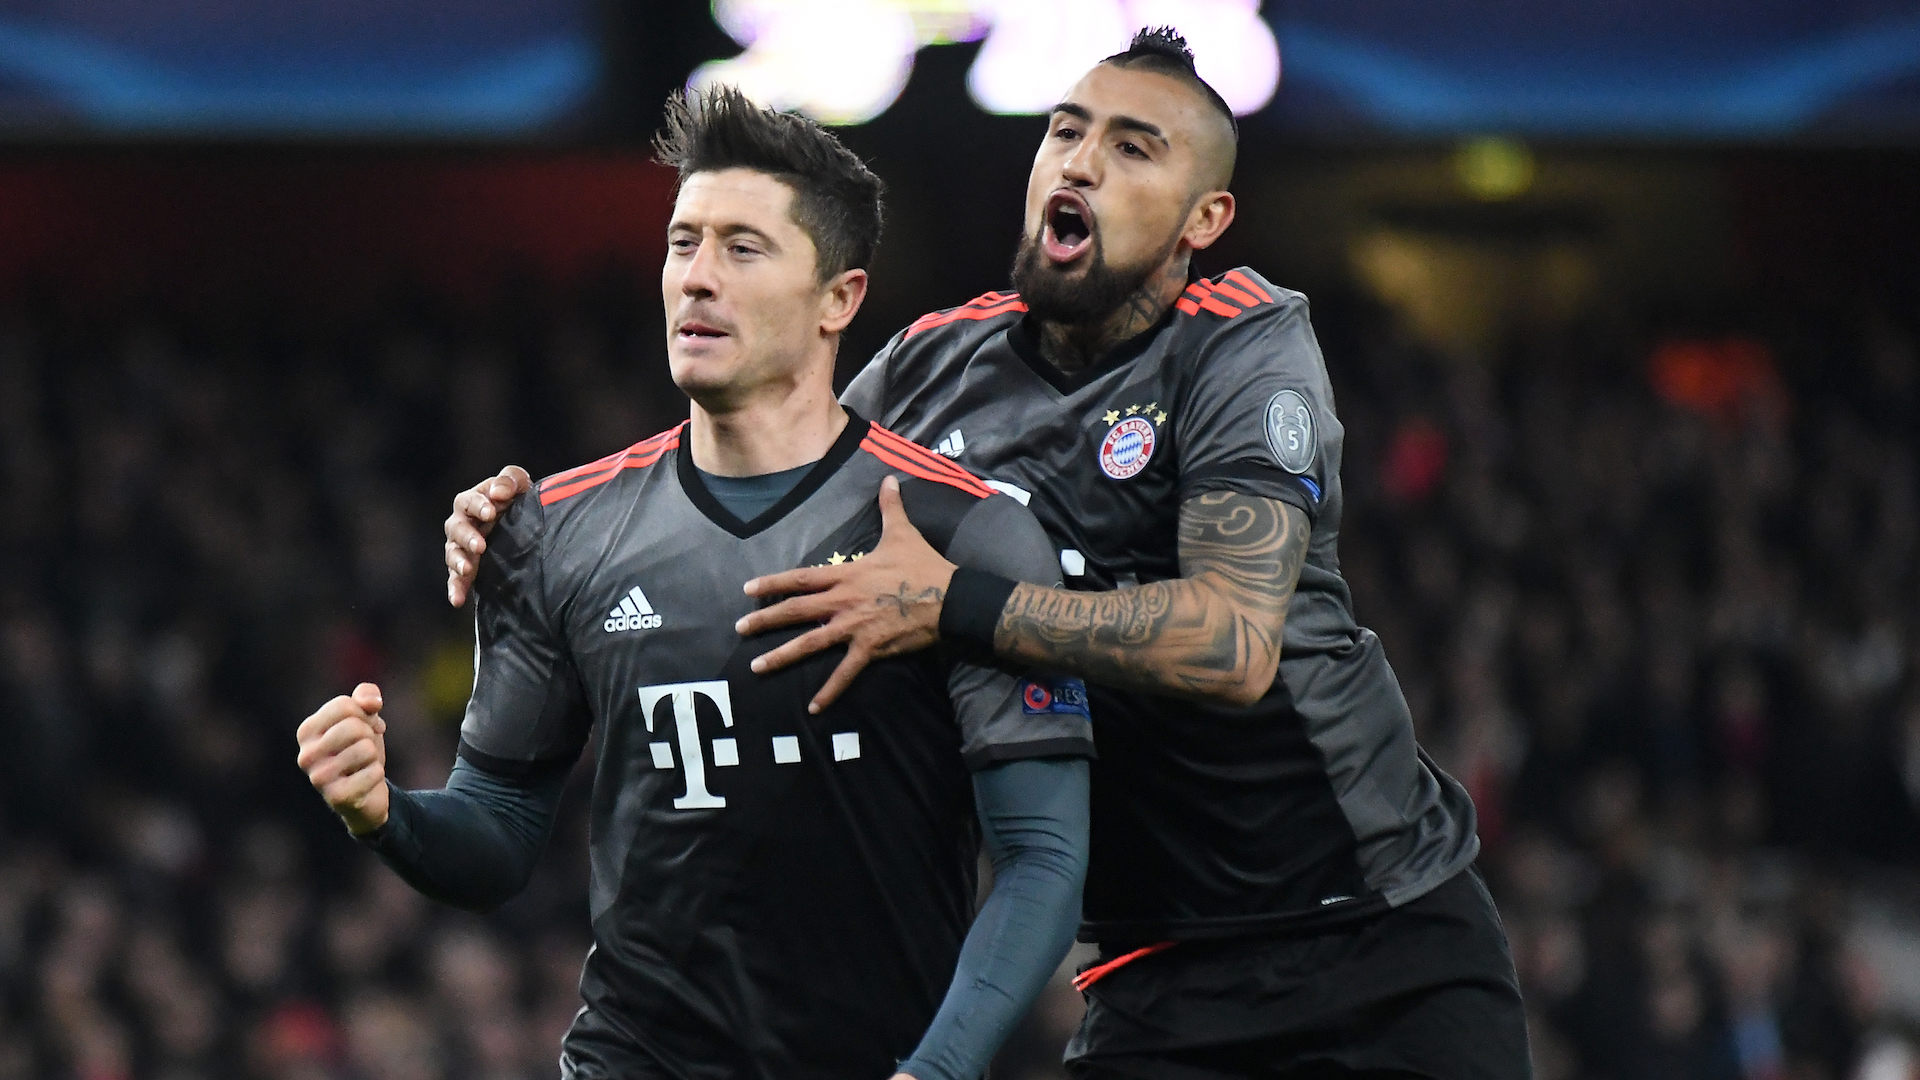 Robert Lewandowski and Arturo Vidal celebrate after a goal during the UEFA Champions League Round of 16 game between Arsenal FC and Bayern Munich at Emirates Stadium